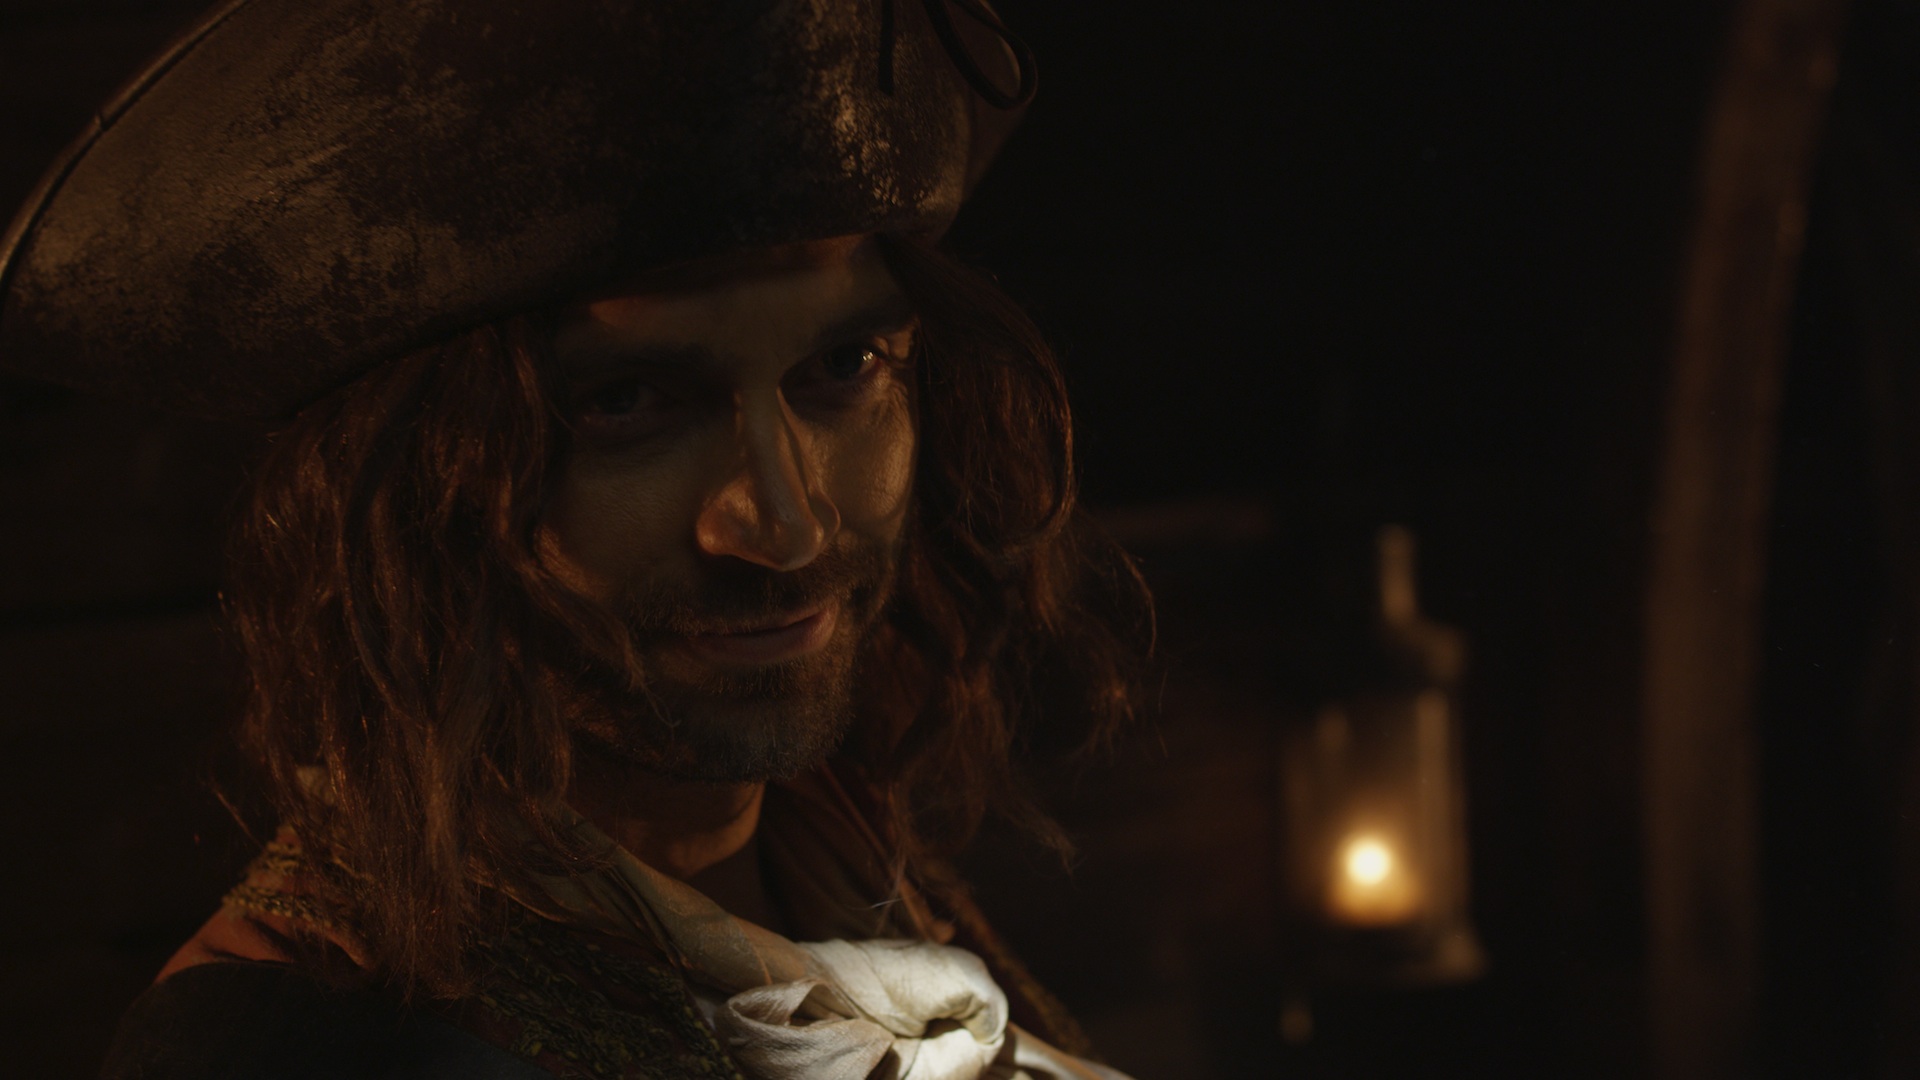 ANDREW FITCH as Captain 'Calico Jack' Rackham in 'Through the Eyes of Men'.